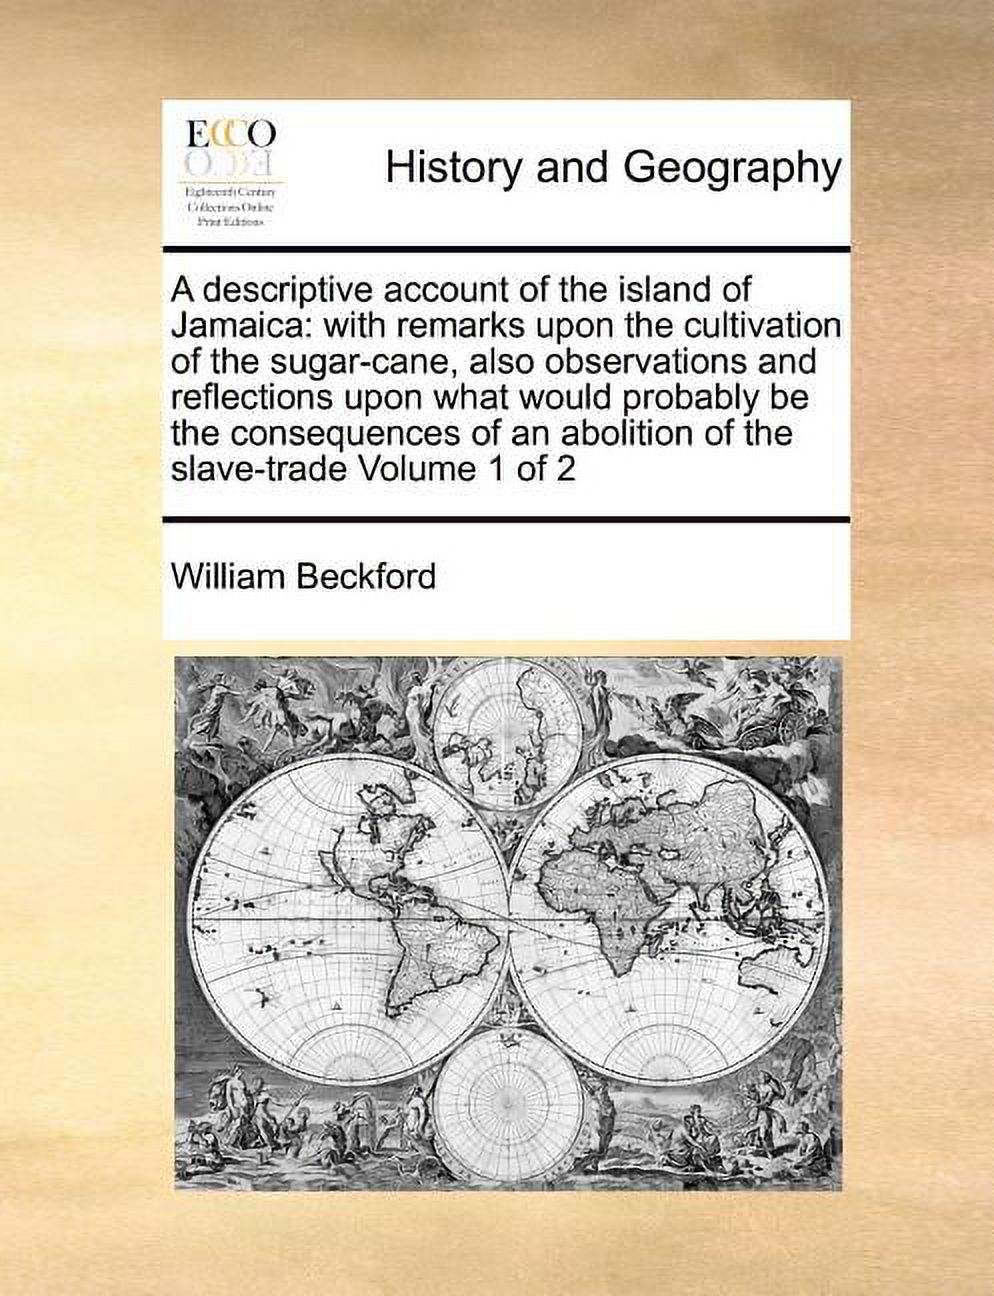 A Descriptive Account of the Island of Jamaica : With Remarks Upon the Cultivation of the Sugar-Cane, Also Observations and Reflections Upon What Would Probably Be the Consequences of an Abolition of the Slave-Trade Volume 1 of 2 (Paperback) - image 1 of 1